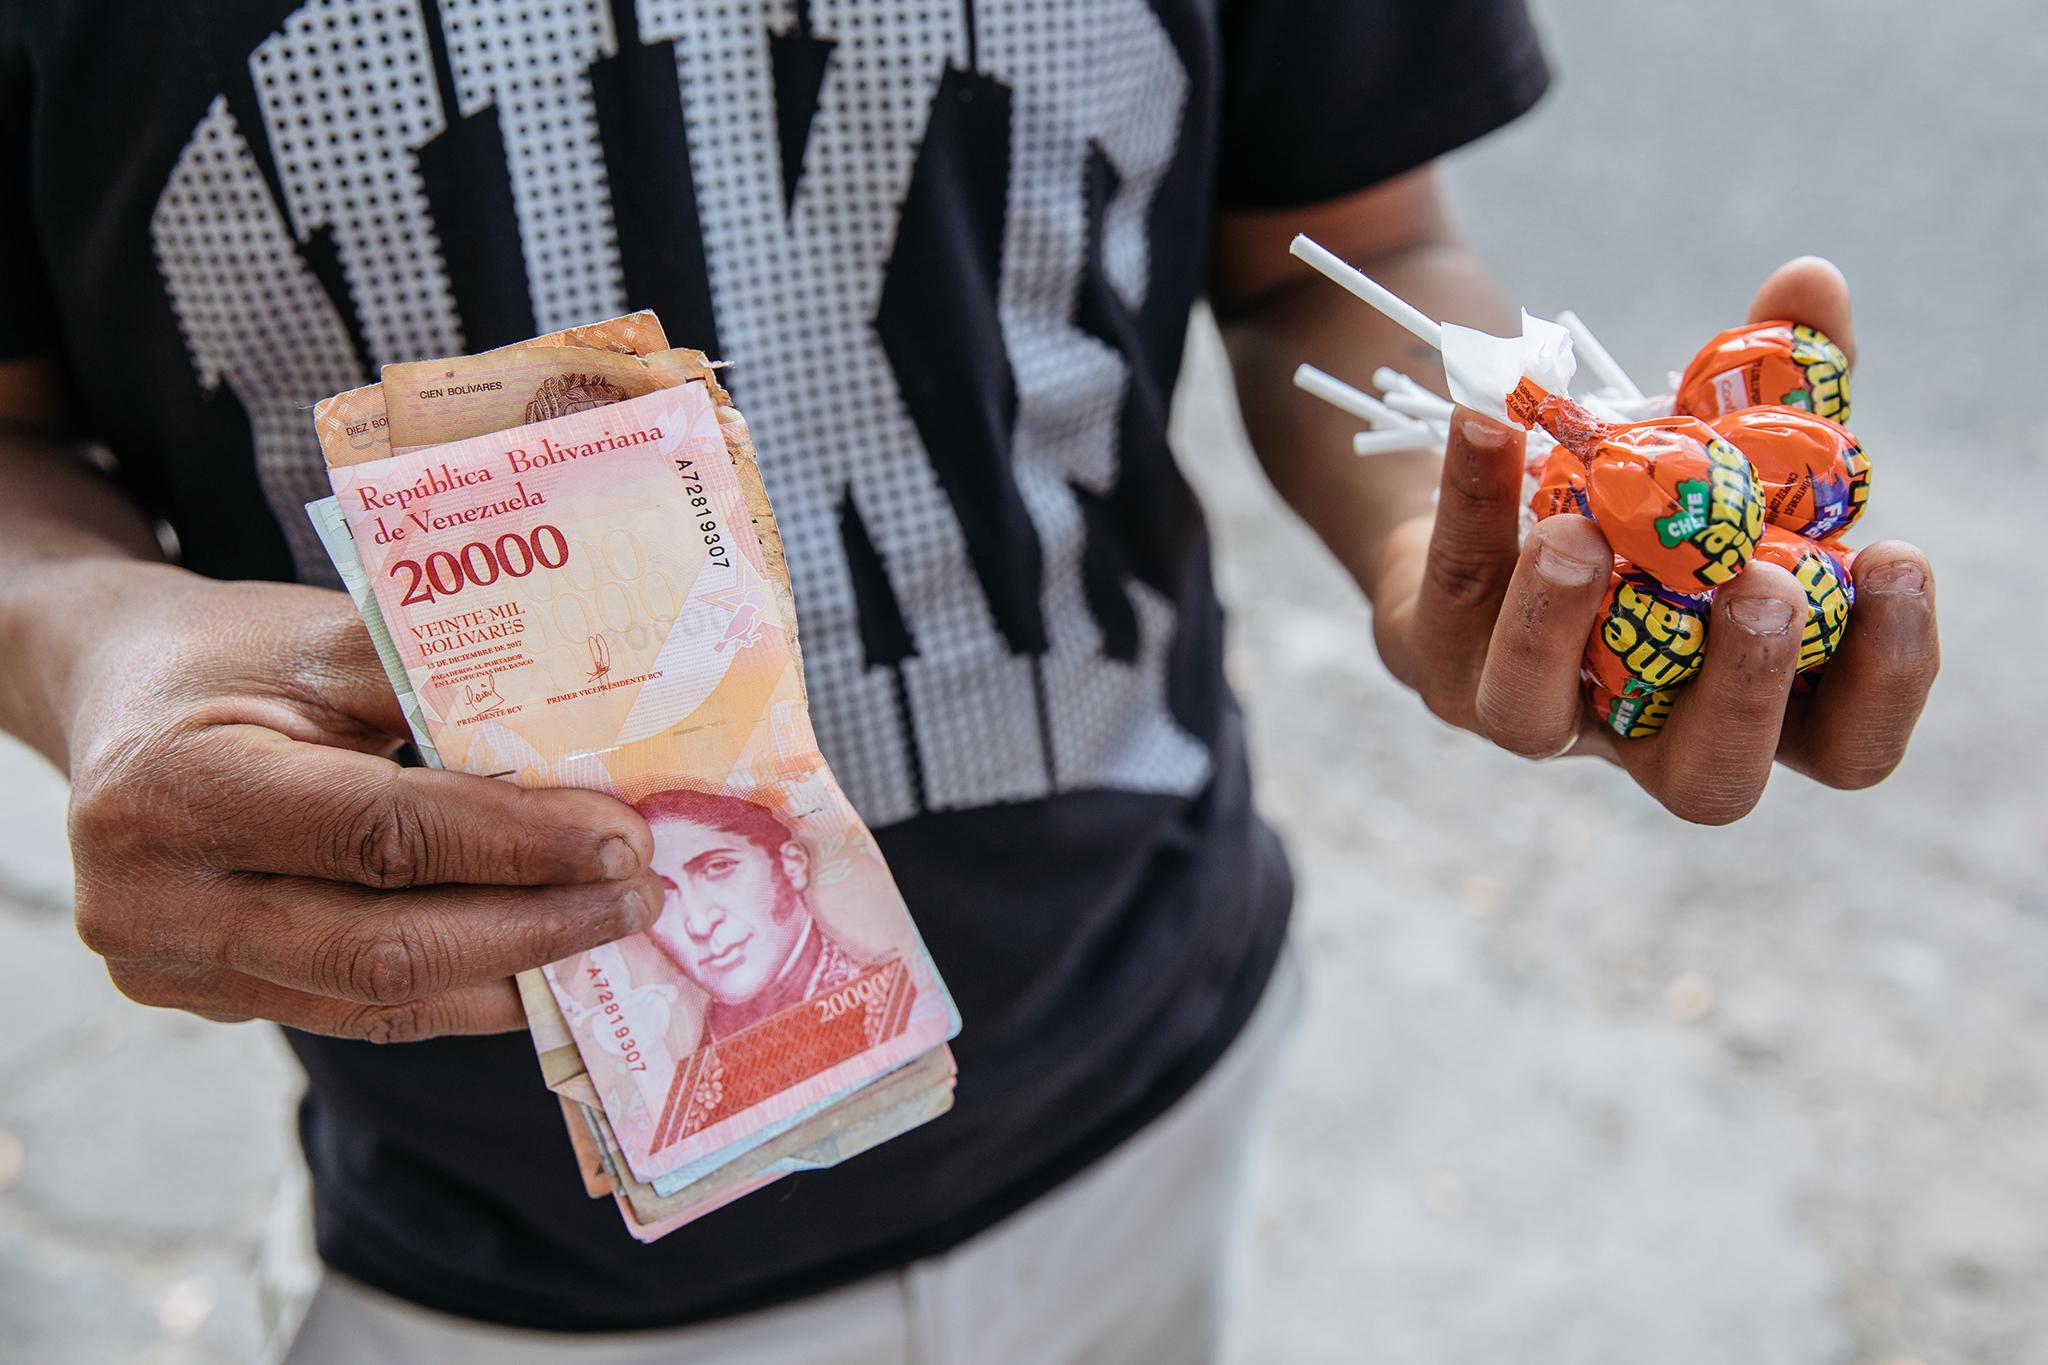 Jesus Bolivar, 29, hands out bolivares with purchases of lollipops in Quito to support his family back home (Paddy Dowling)